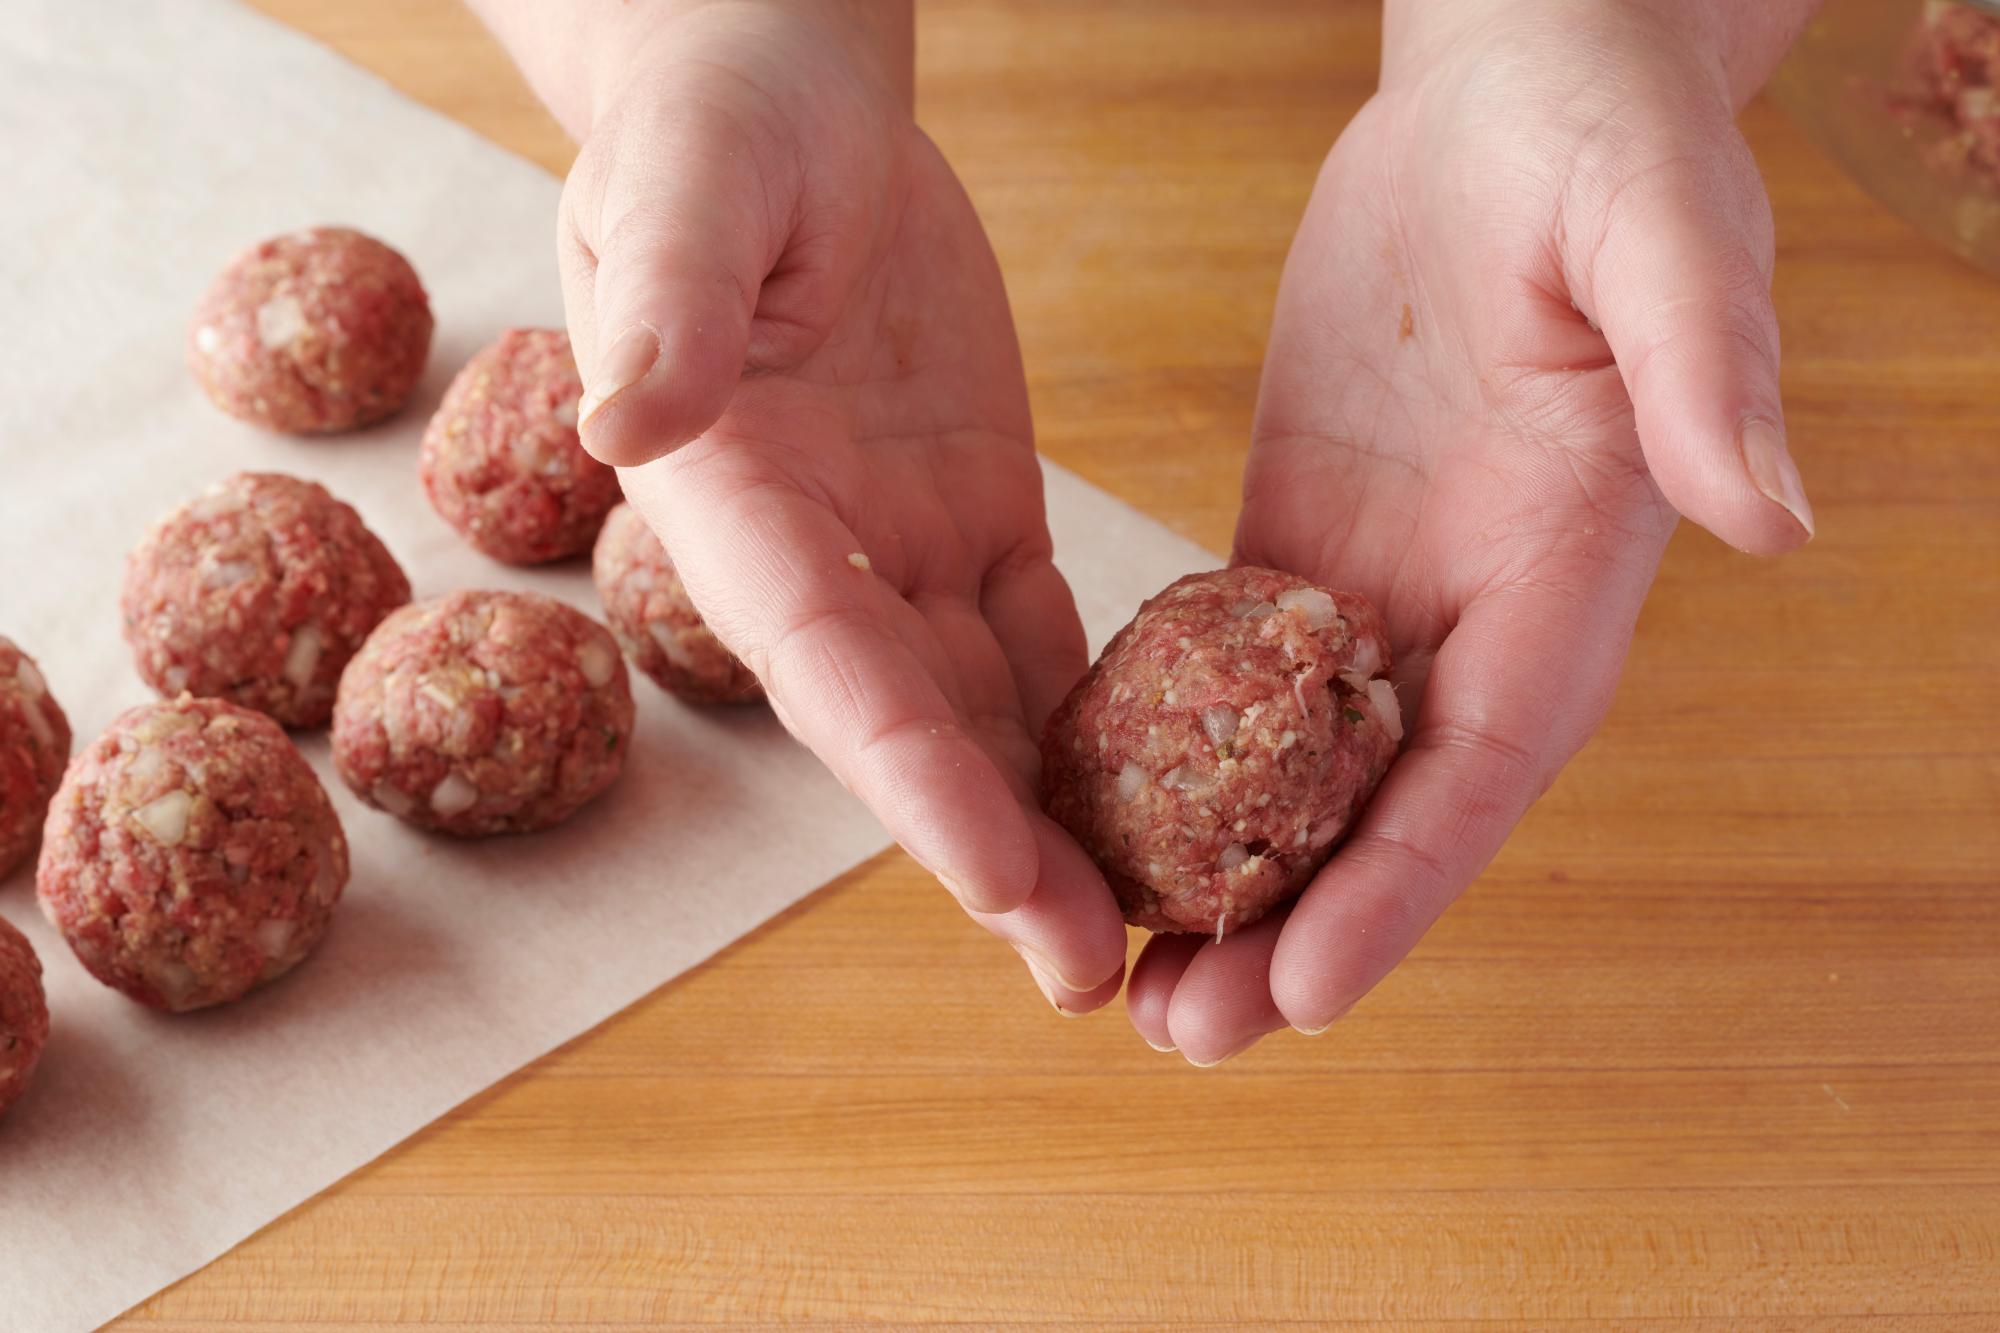 Rolling the meatballs by hand.